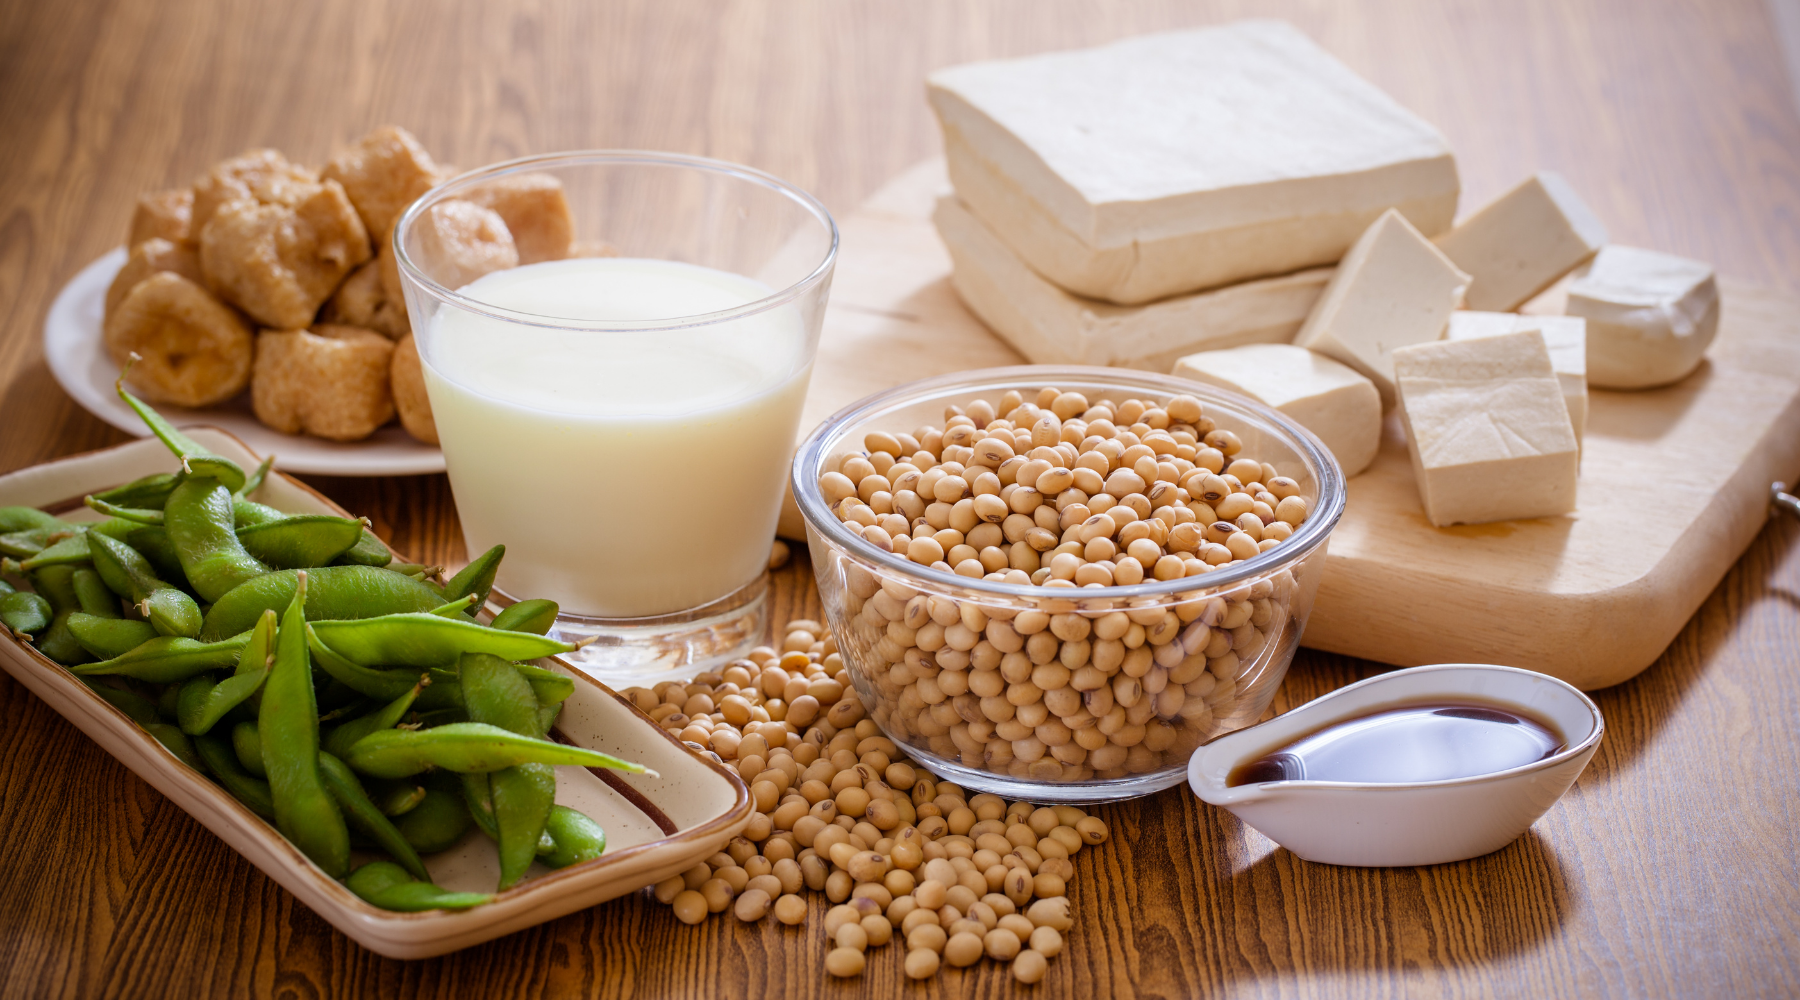 ARE SOY FOODS HEALTHY?